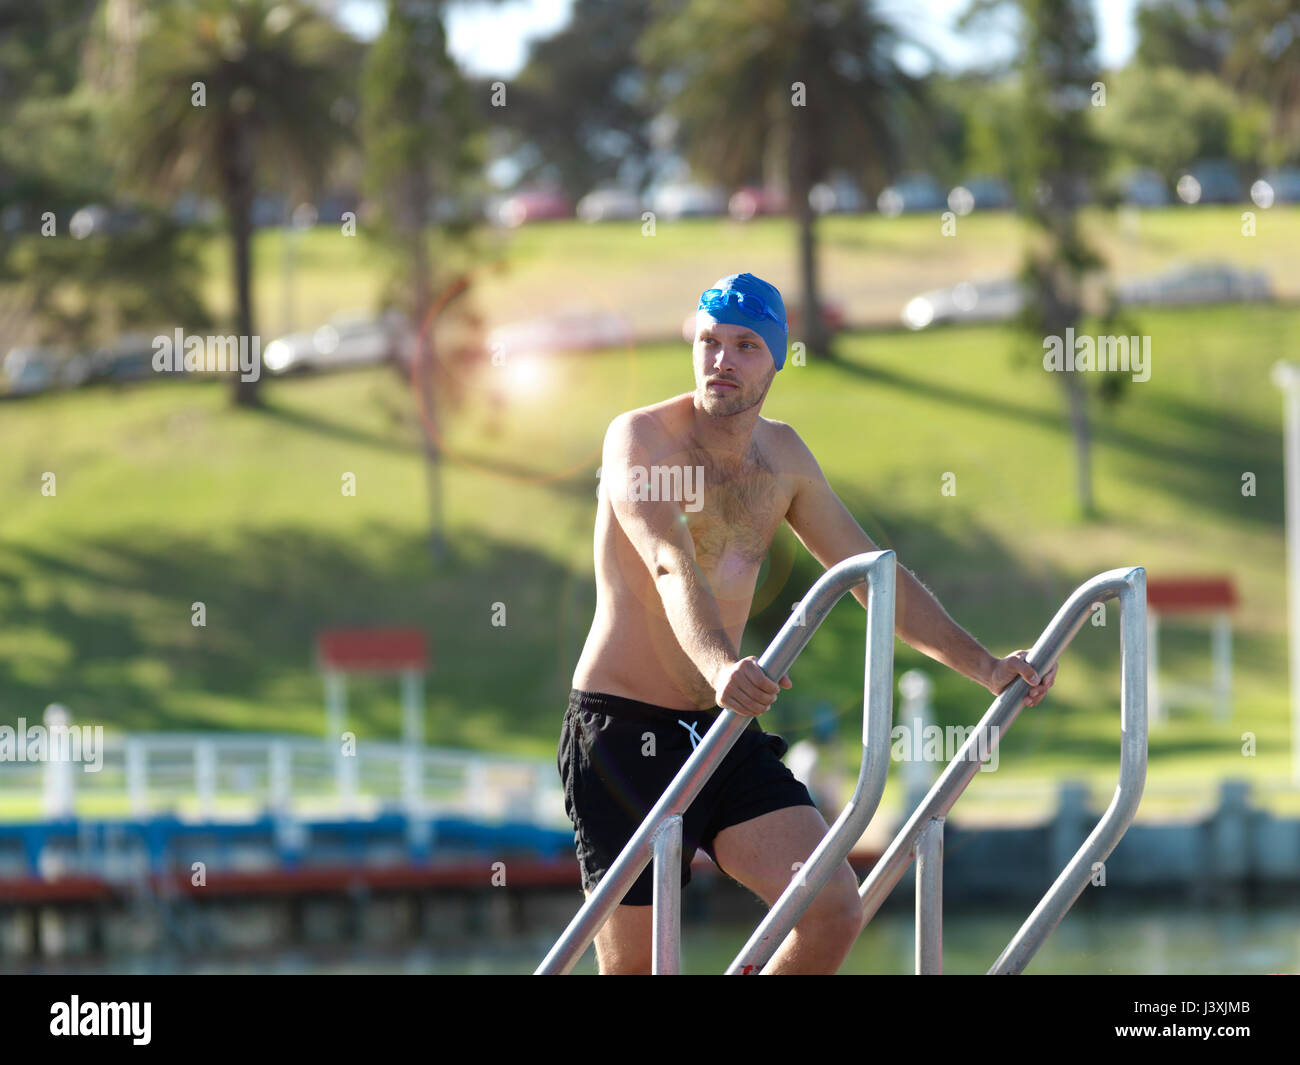 Swimmer coming up from water on ladder, Eastern Beach, Geelong, Victoria, Australia Stock Photo